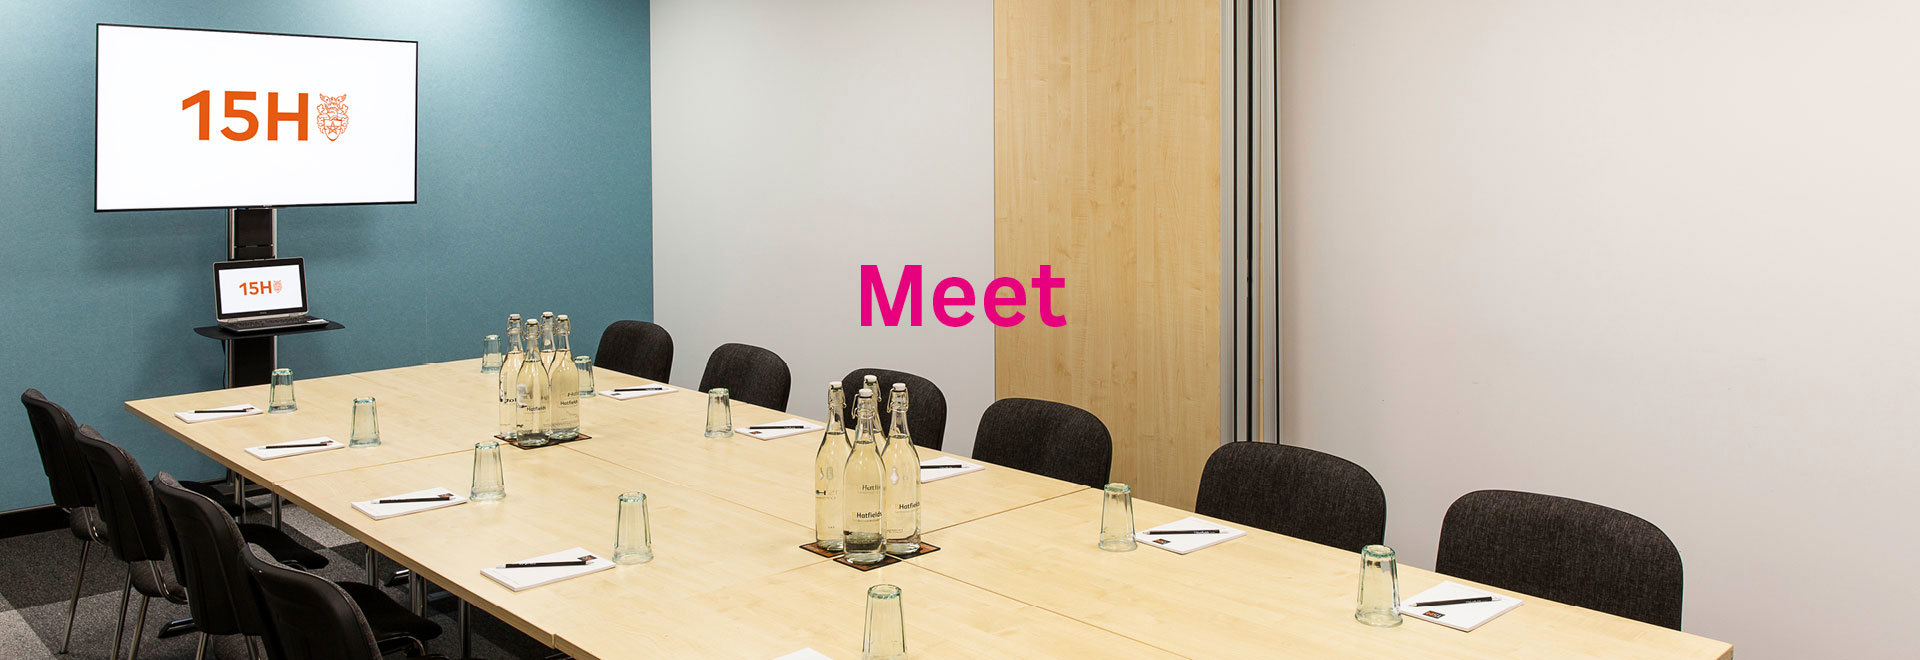 15Hatfields meeting room with the word 'Meet'